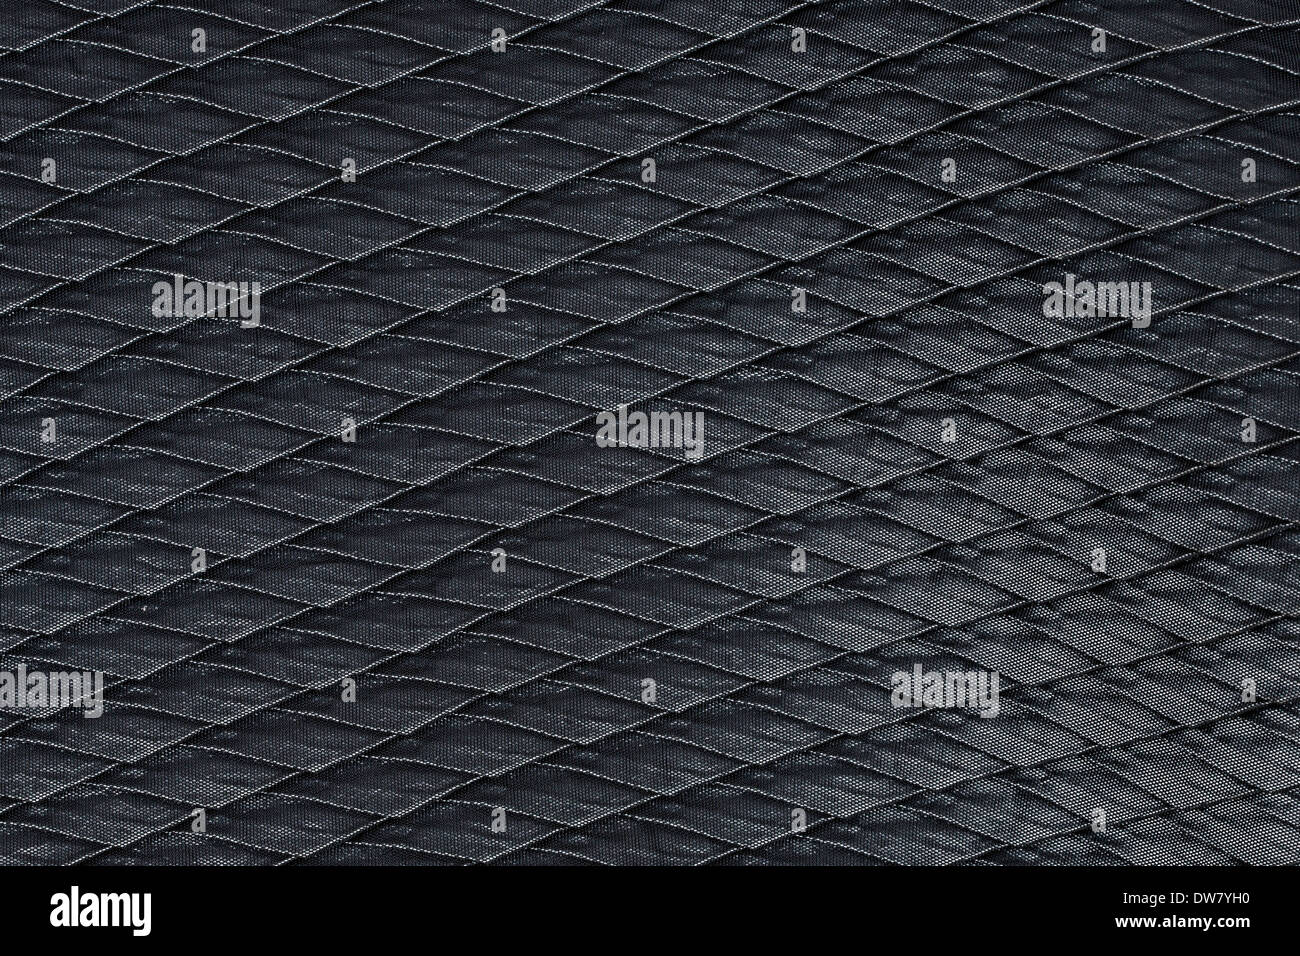 Fabric texture with grid pattern, red squares and black squares